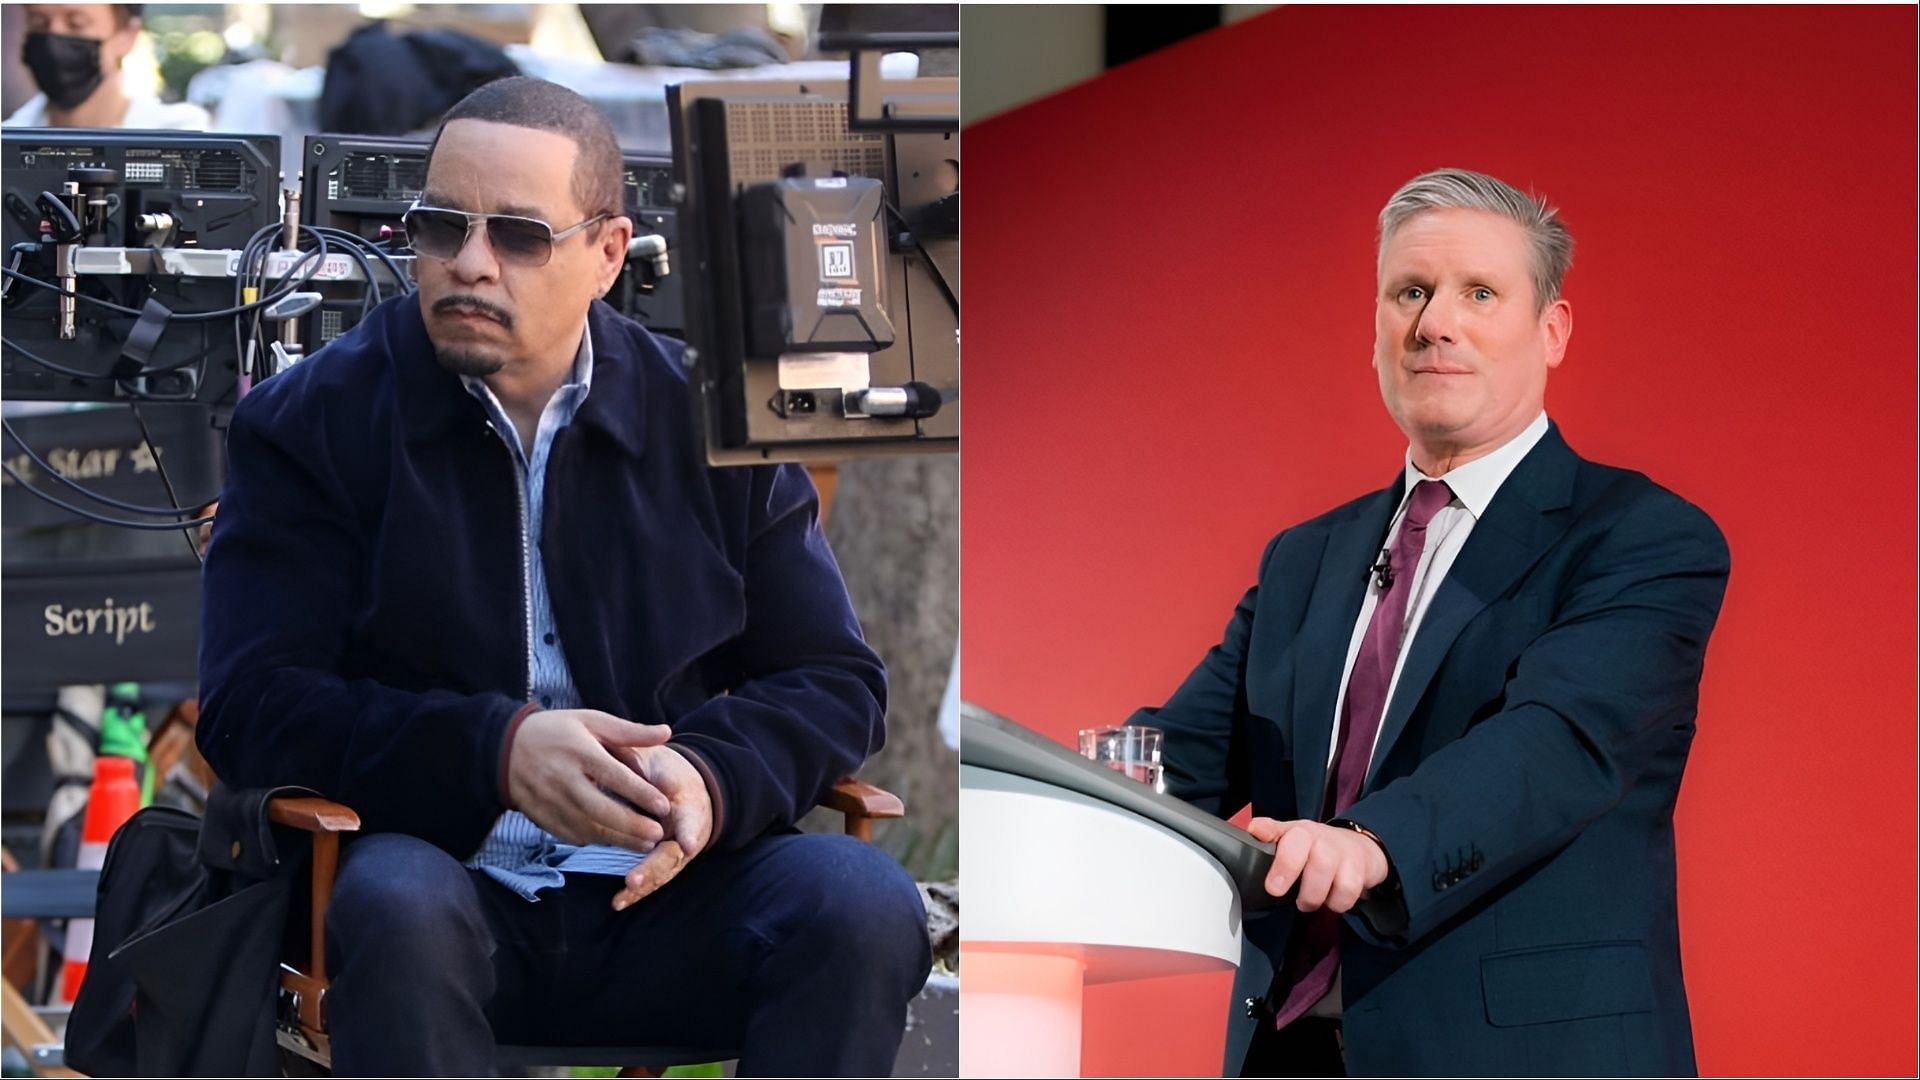 Ice T shared his criticism after reading an interview of Keir Starmer (Images via Instagram/icet and keirstarmer)